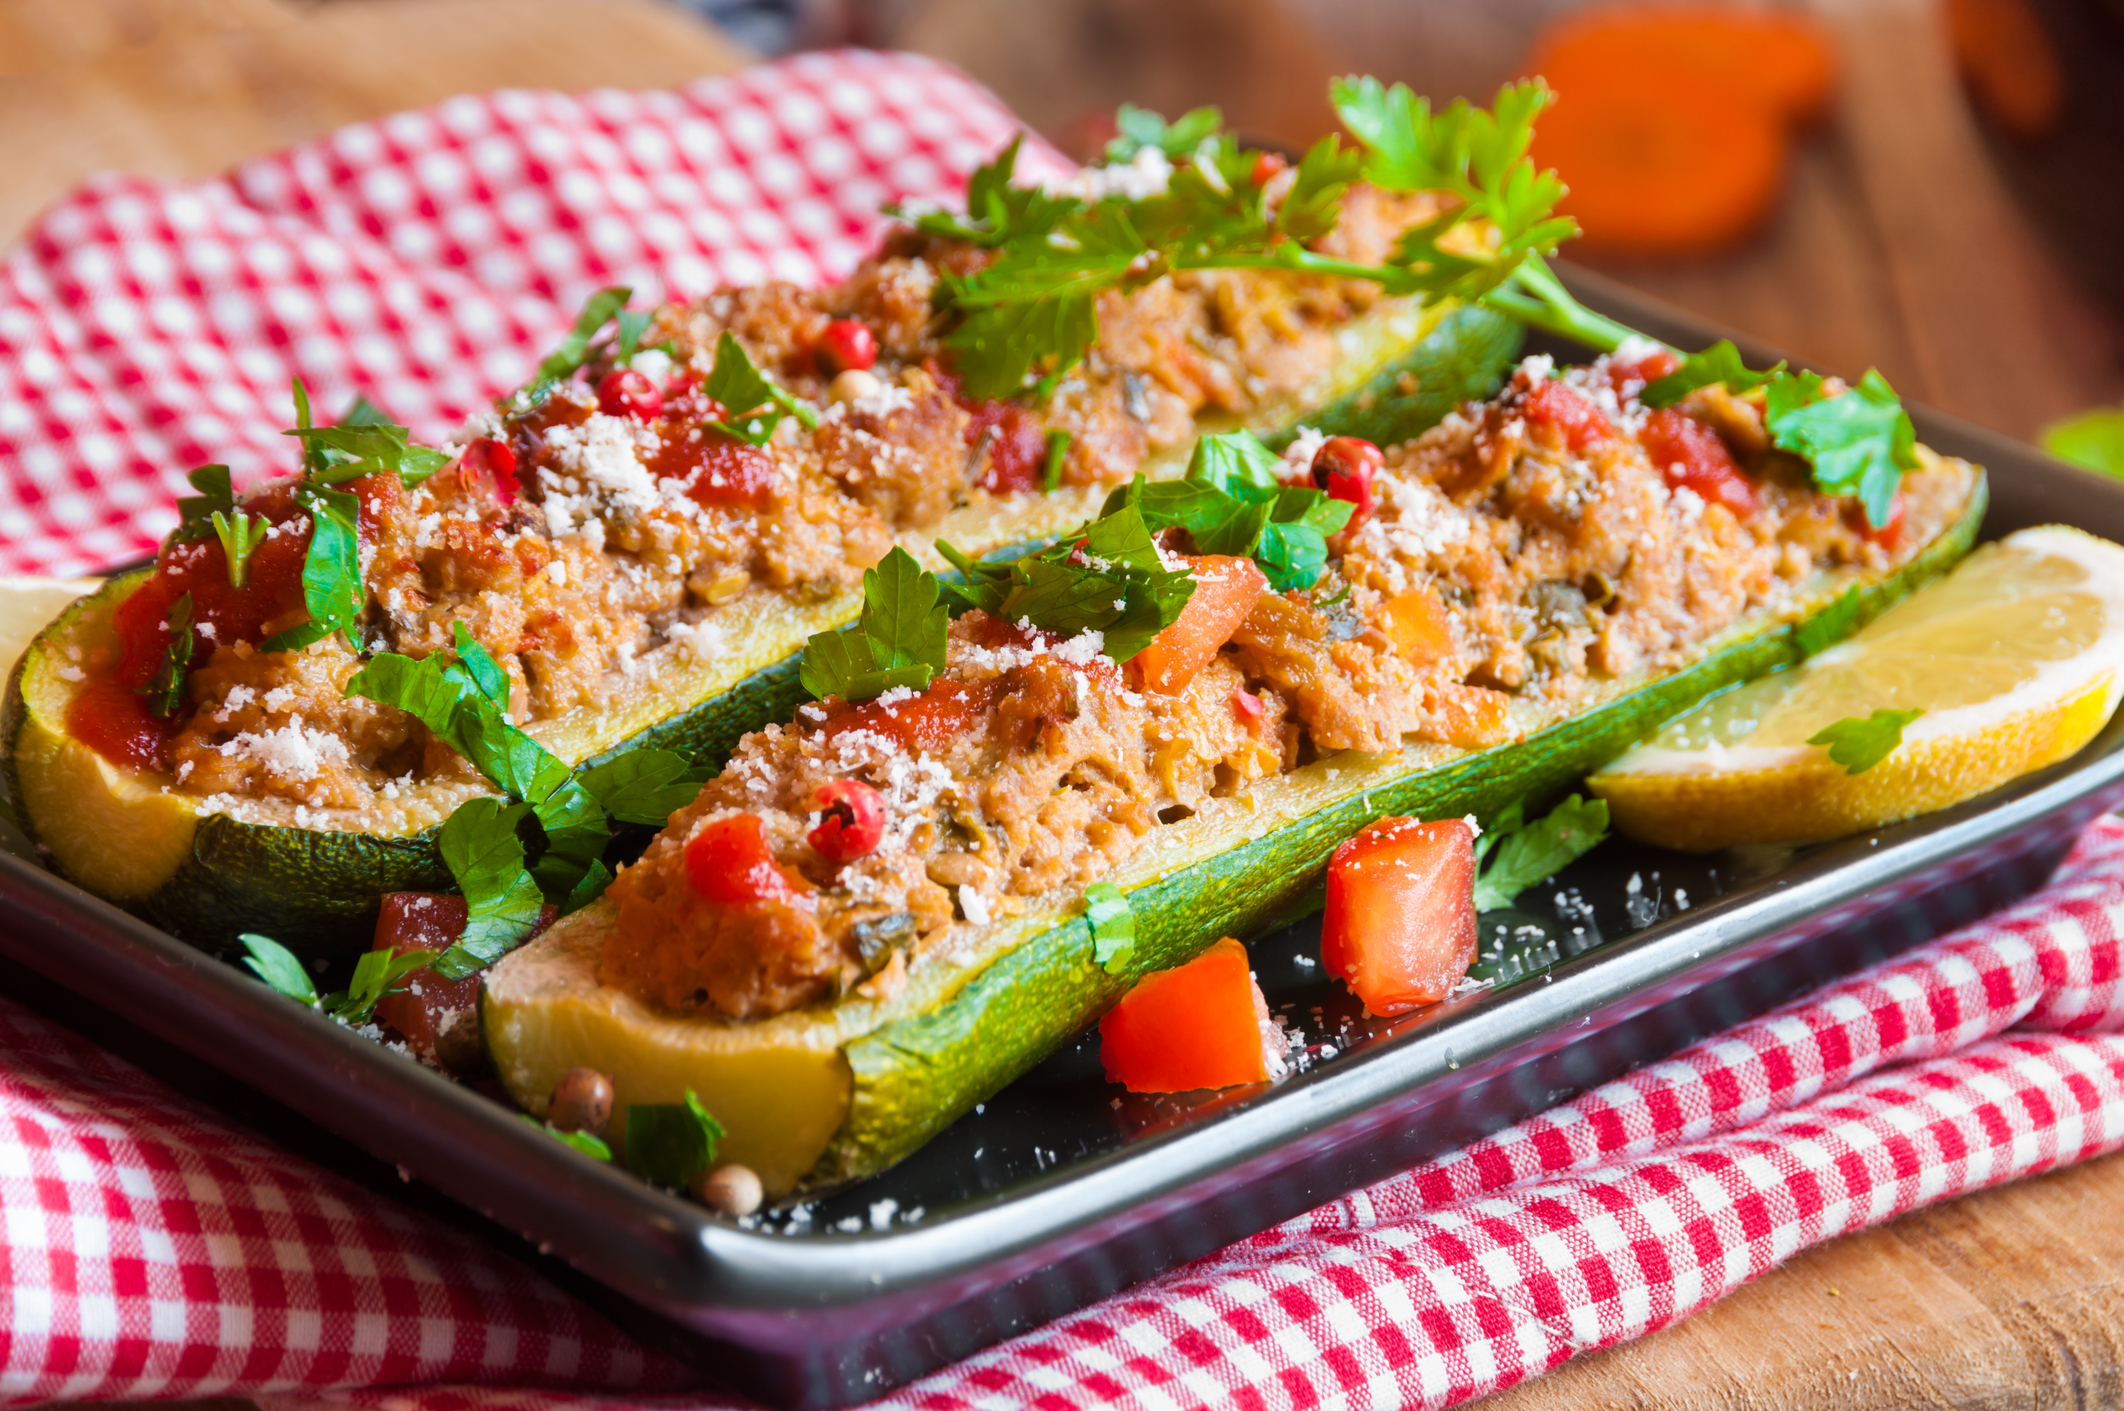 Stuffed Zucchinis 2 Ways – Vegetarian and With Meat